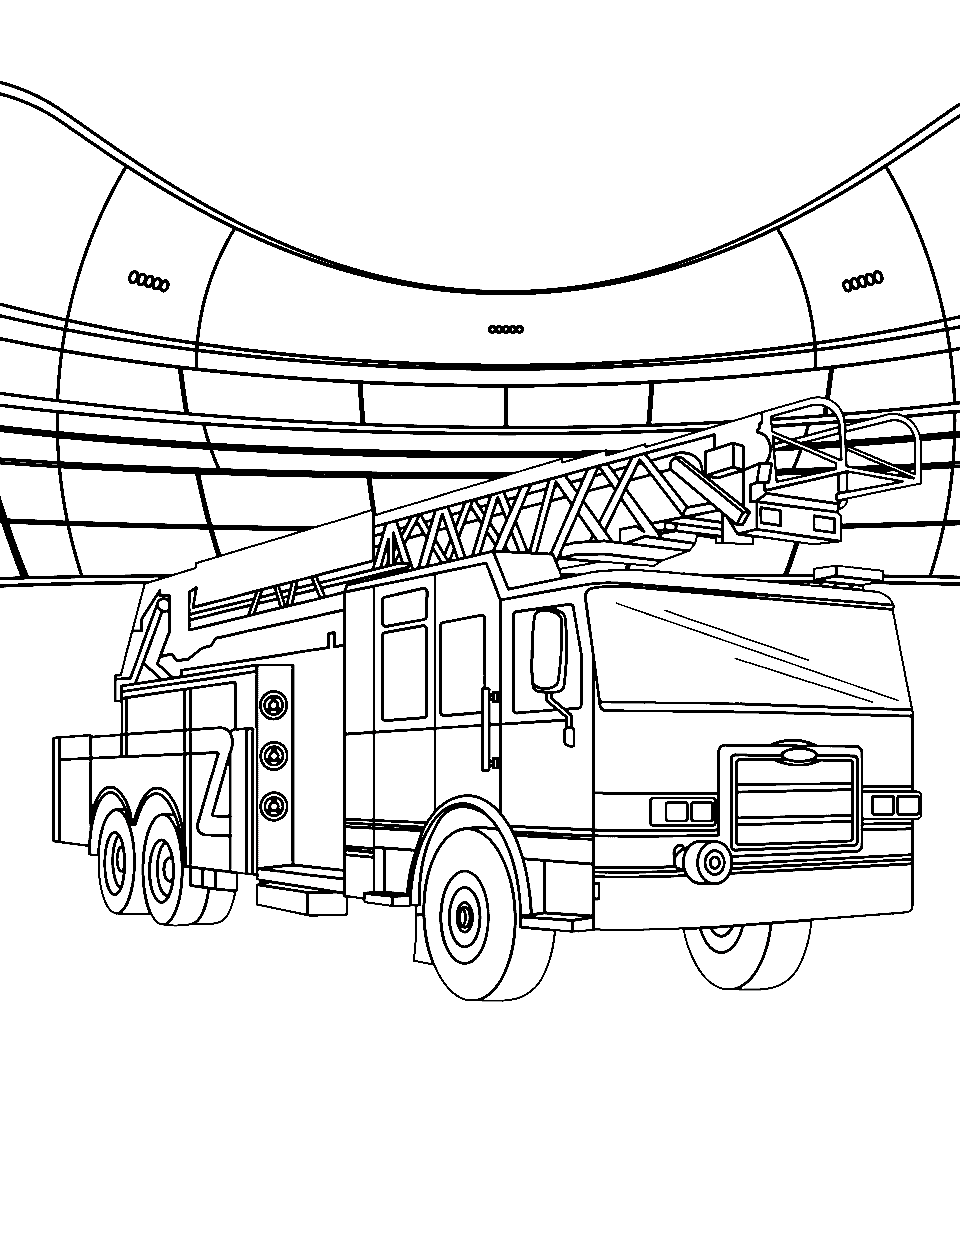 Fire Truck at a Sports Game Coloring Page - A fire truck at a stadium for a sports event.